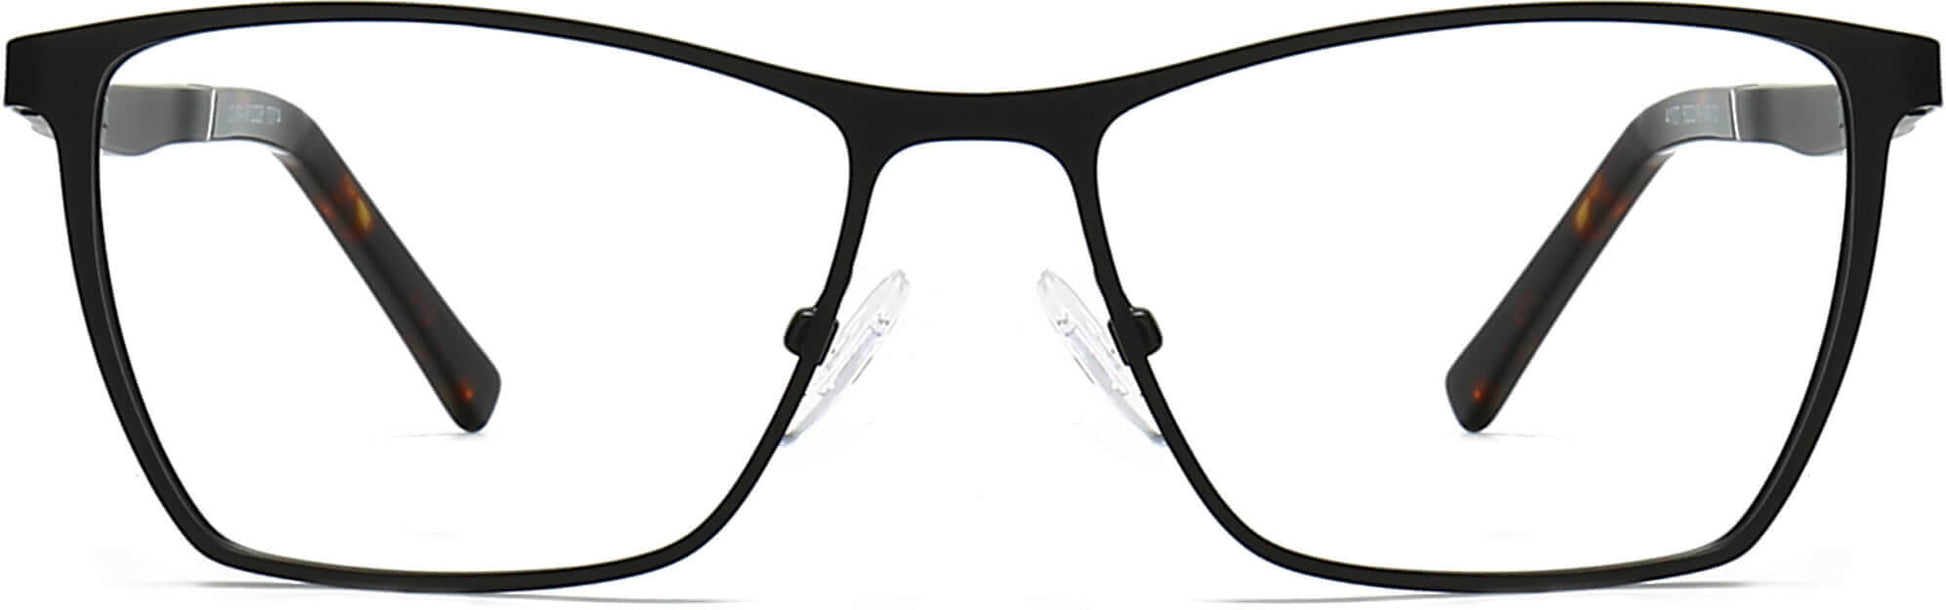 Delilah Cateye Black Eyeglasses from ANRRI, front view